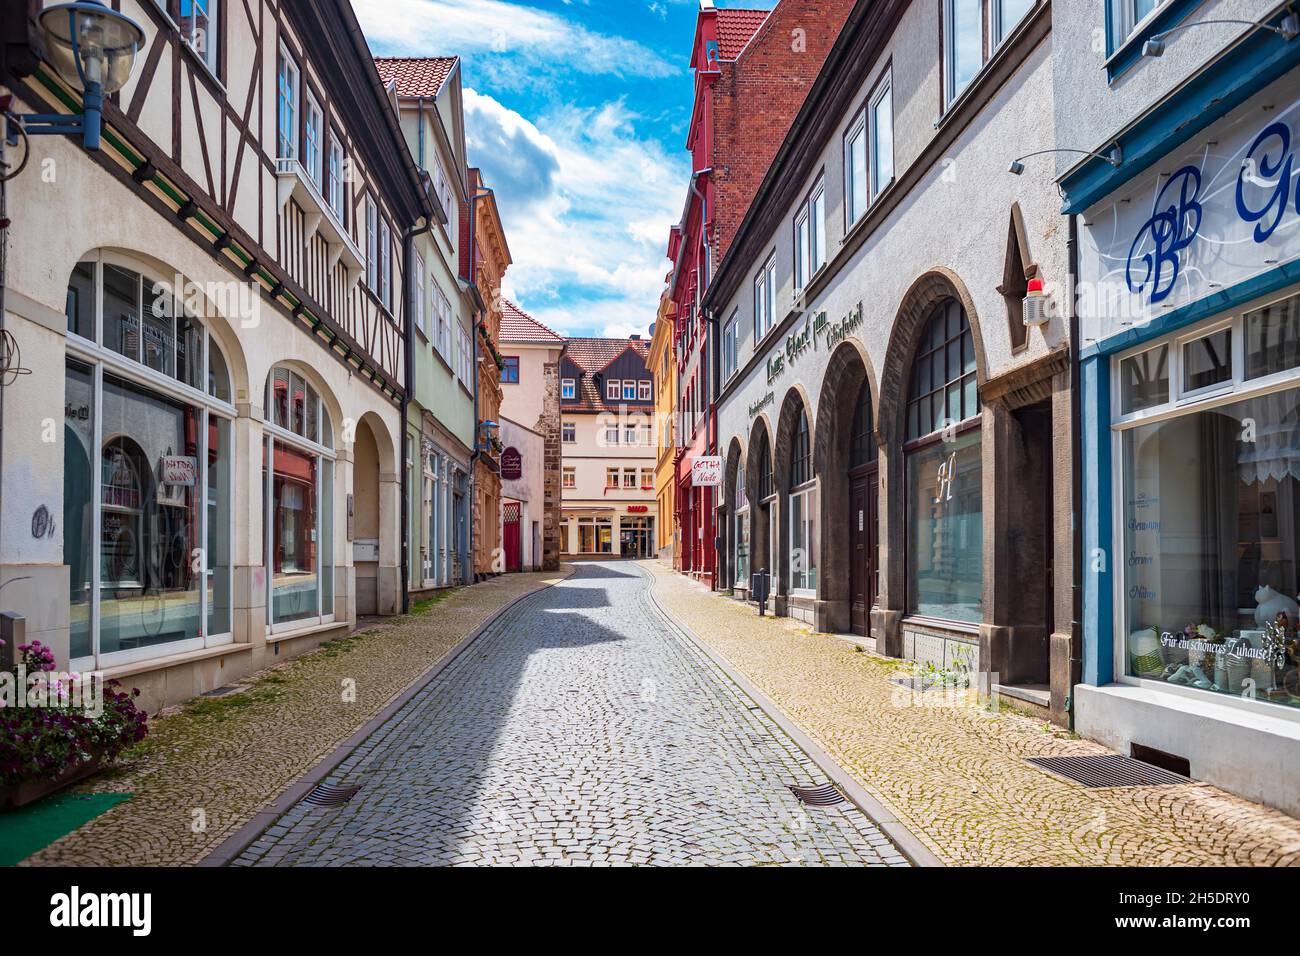 GOTHA, GERMANY - CIRCA AUGUST, 2021: The townscape of Gotha, Thuringia, Germany. Stock Photo